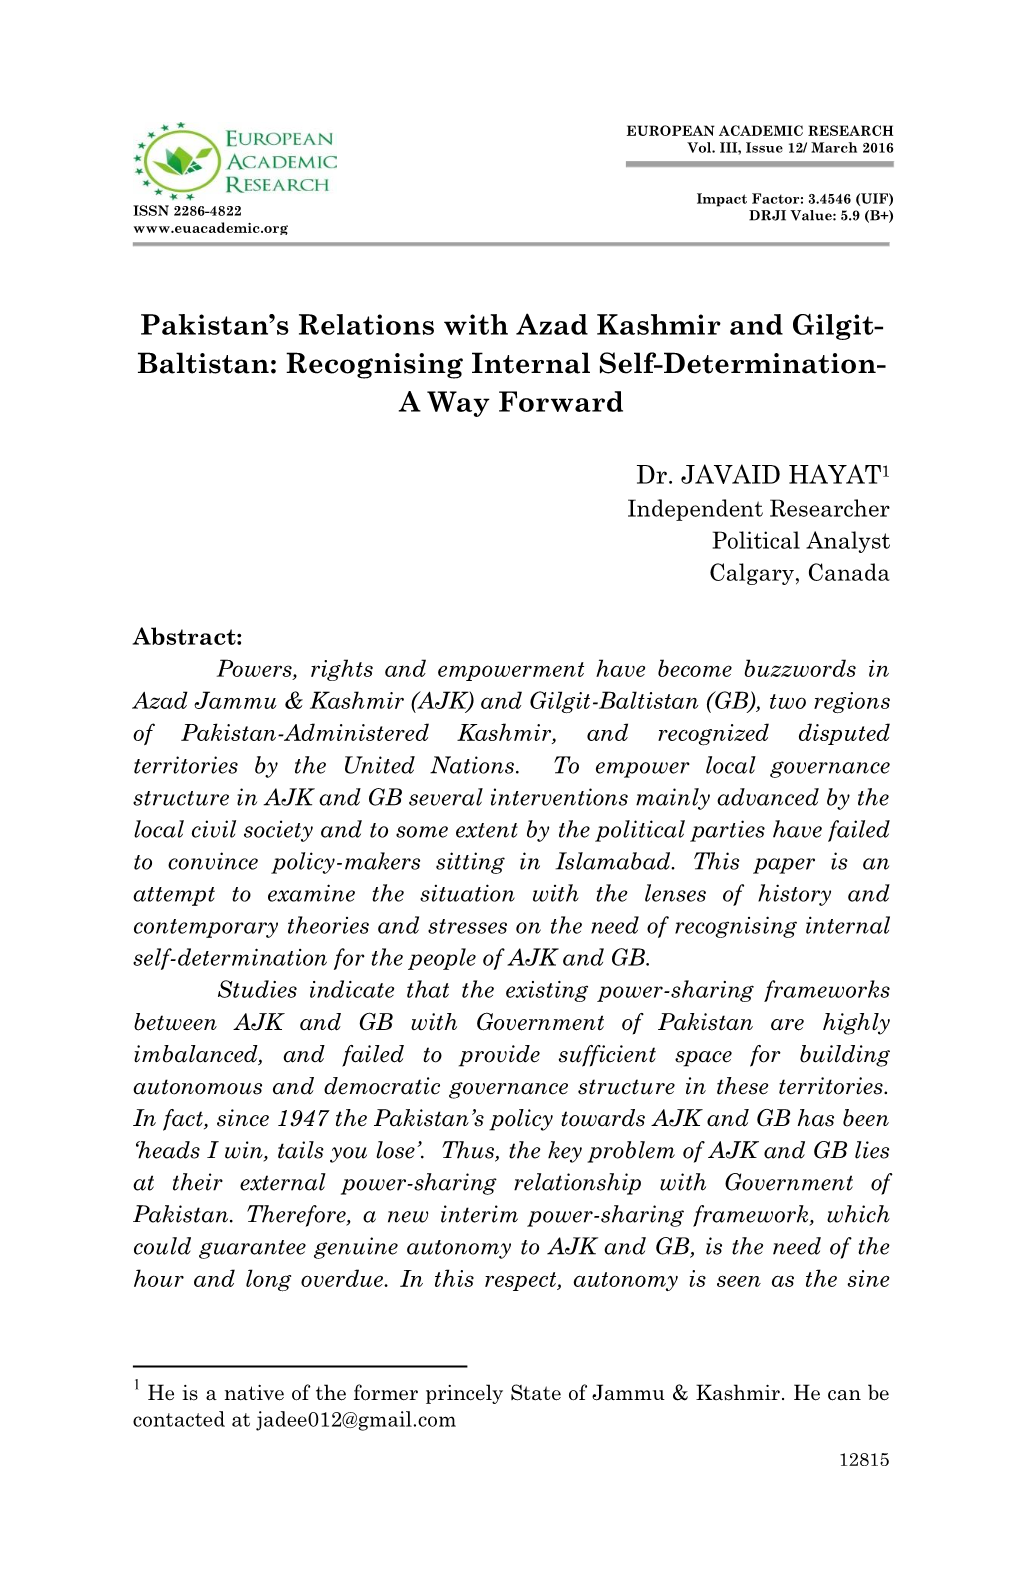 Pakistan's Relations with Azad Kashmir and Gilgit